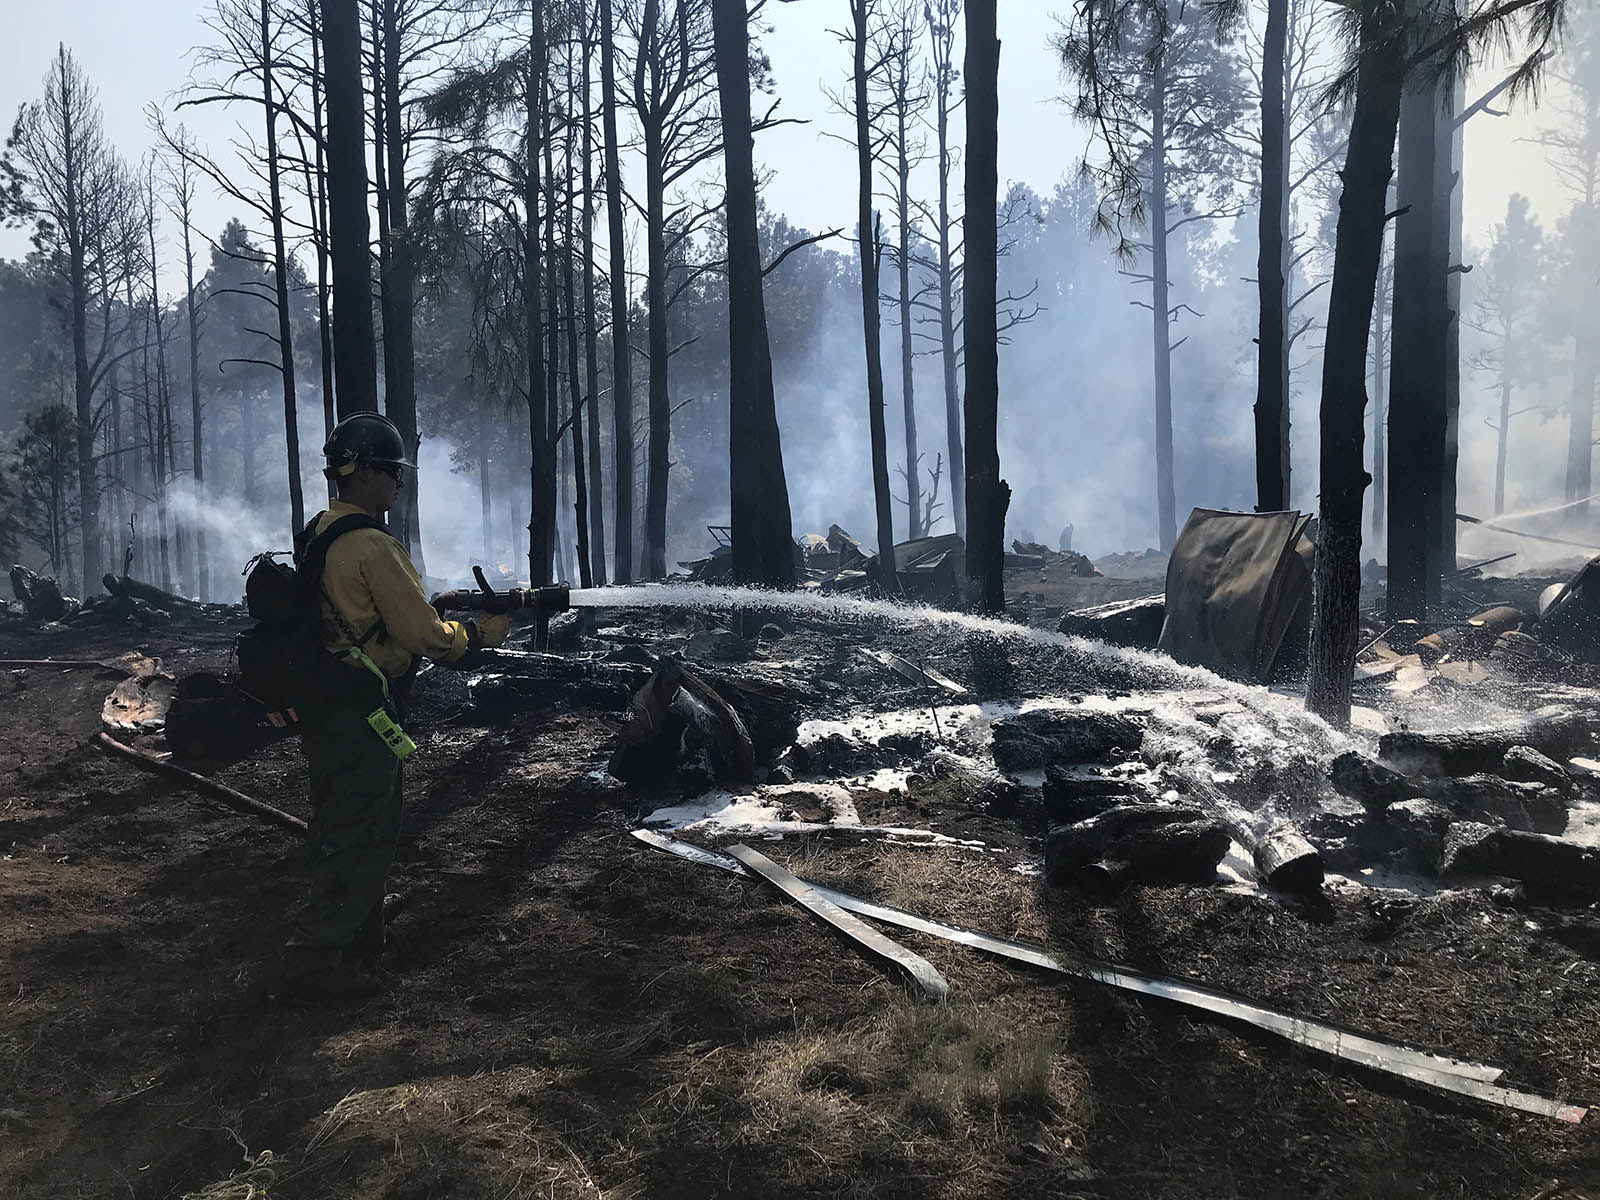 Fireman extinguishing fire in forest